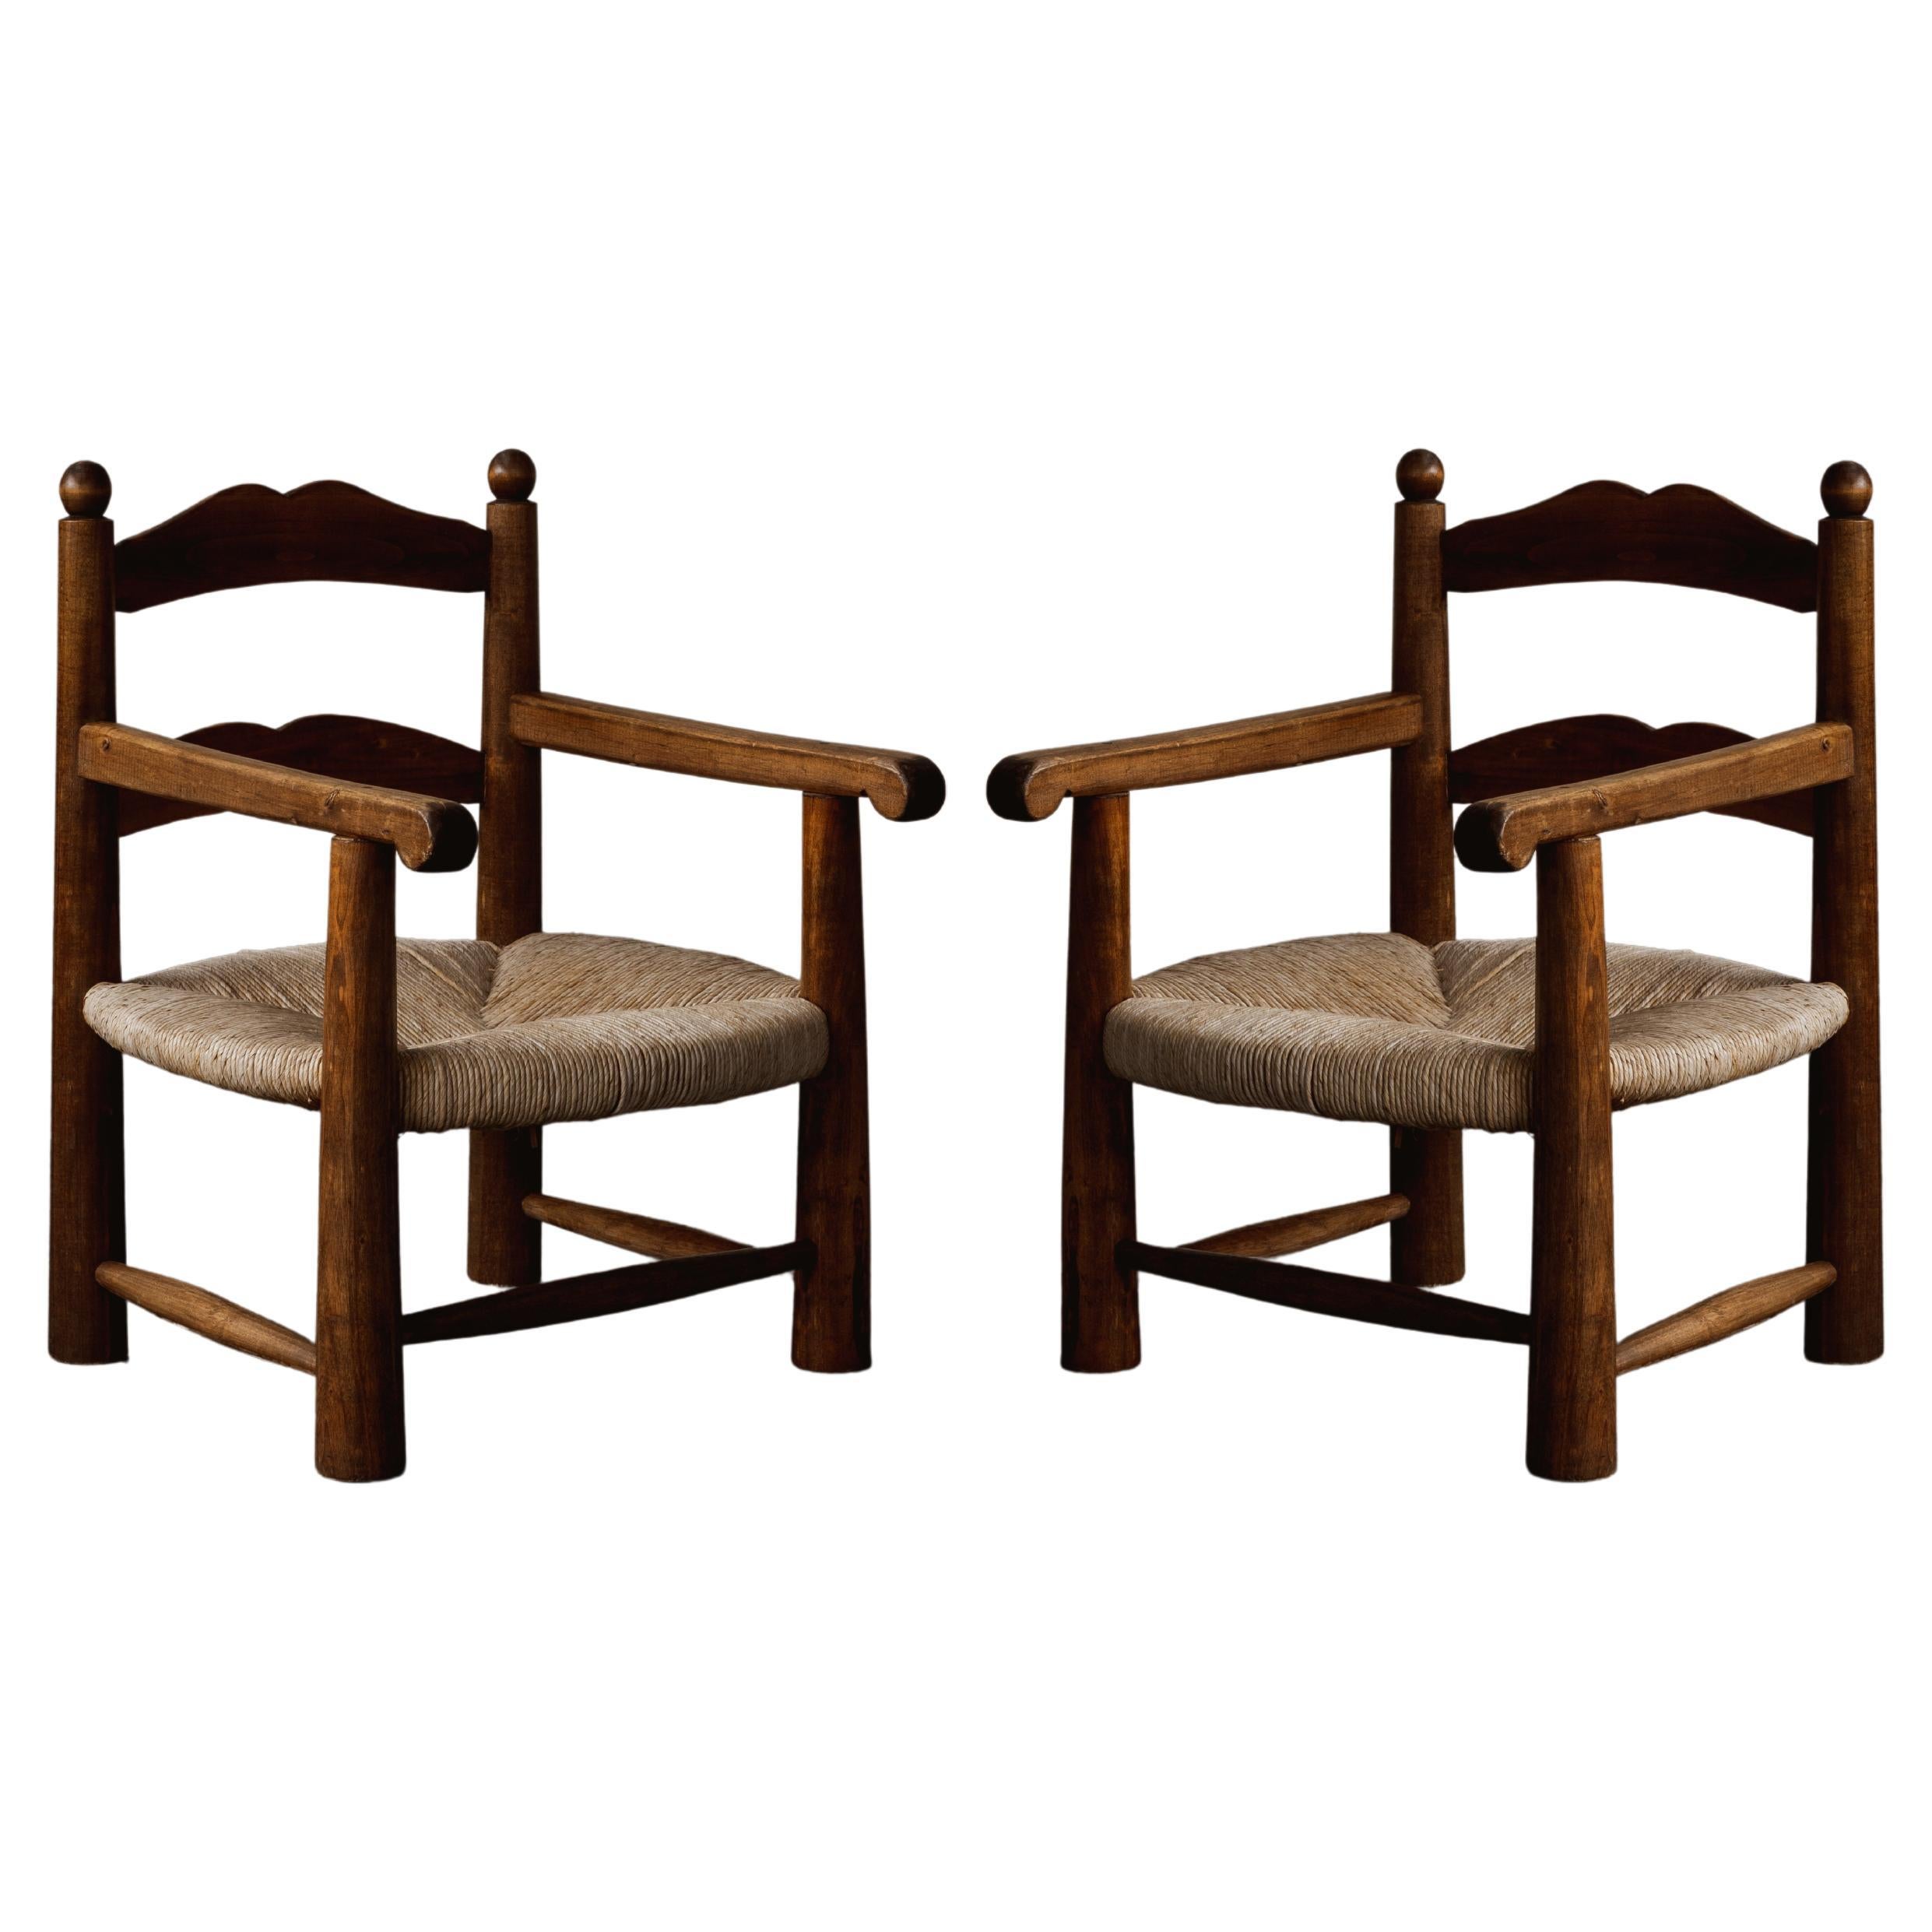 Charles Dudouyt Easy Chairs, 1940s, Set of 2